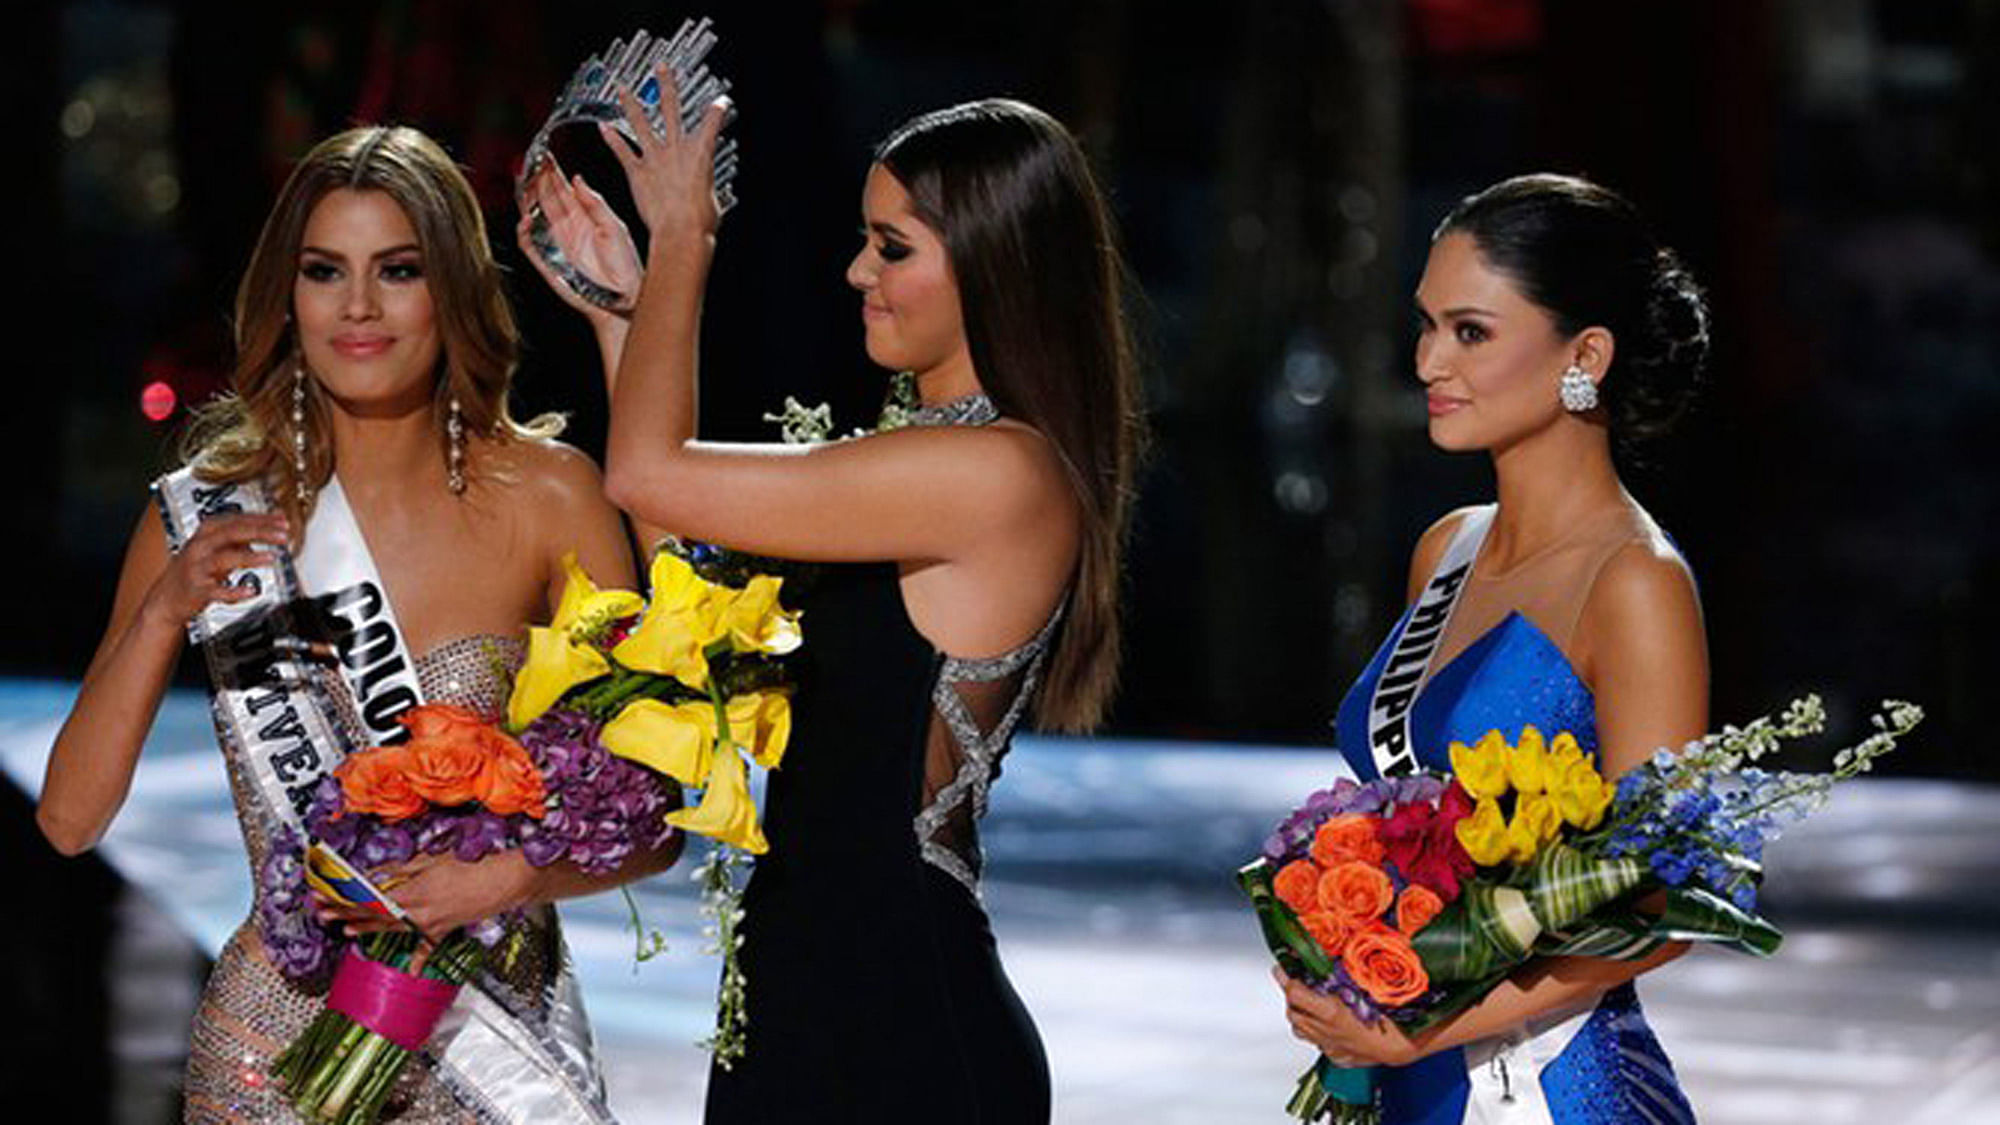 Former Miss Universe Paulina Vega, center, takes the crown off Miss Colombia Ariadna Gutierrez, left, before crowning  Miss Philippines Pia Alonzo Wurtzbach. (Photo: AP)